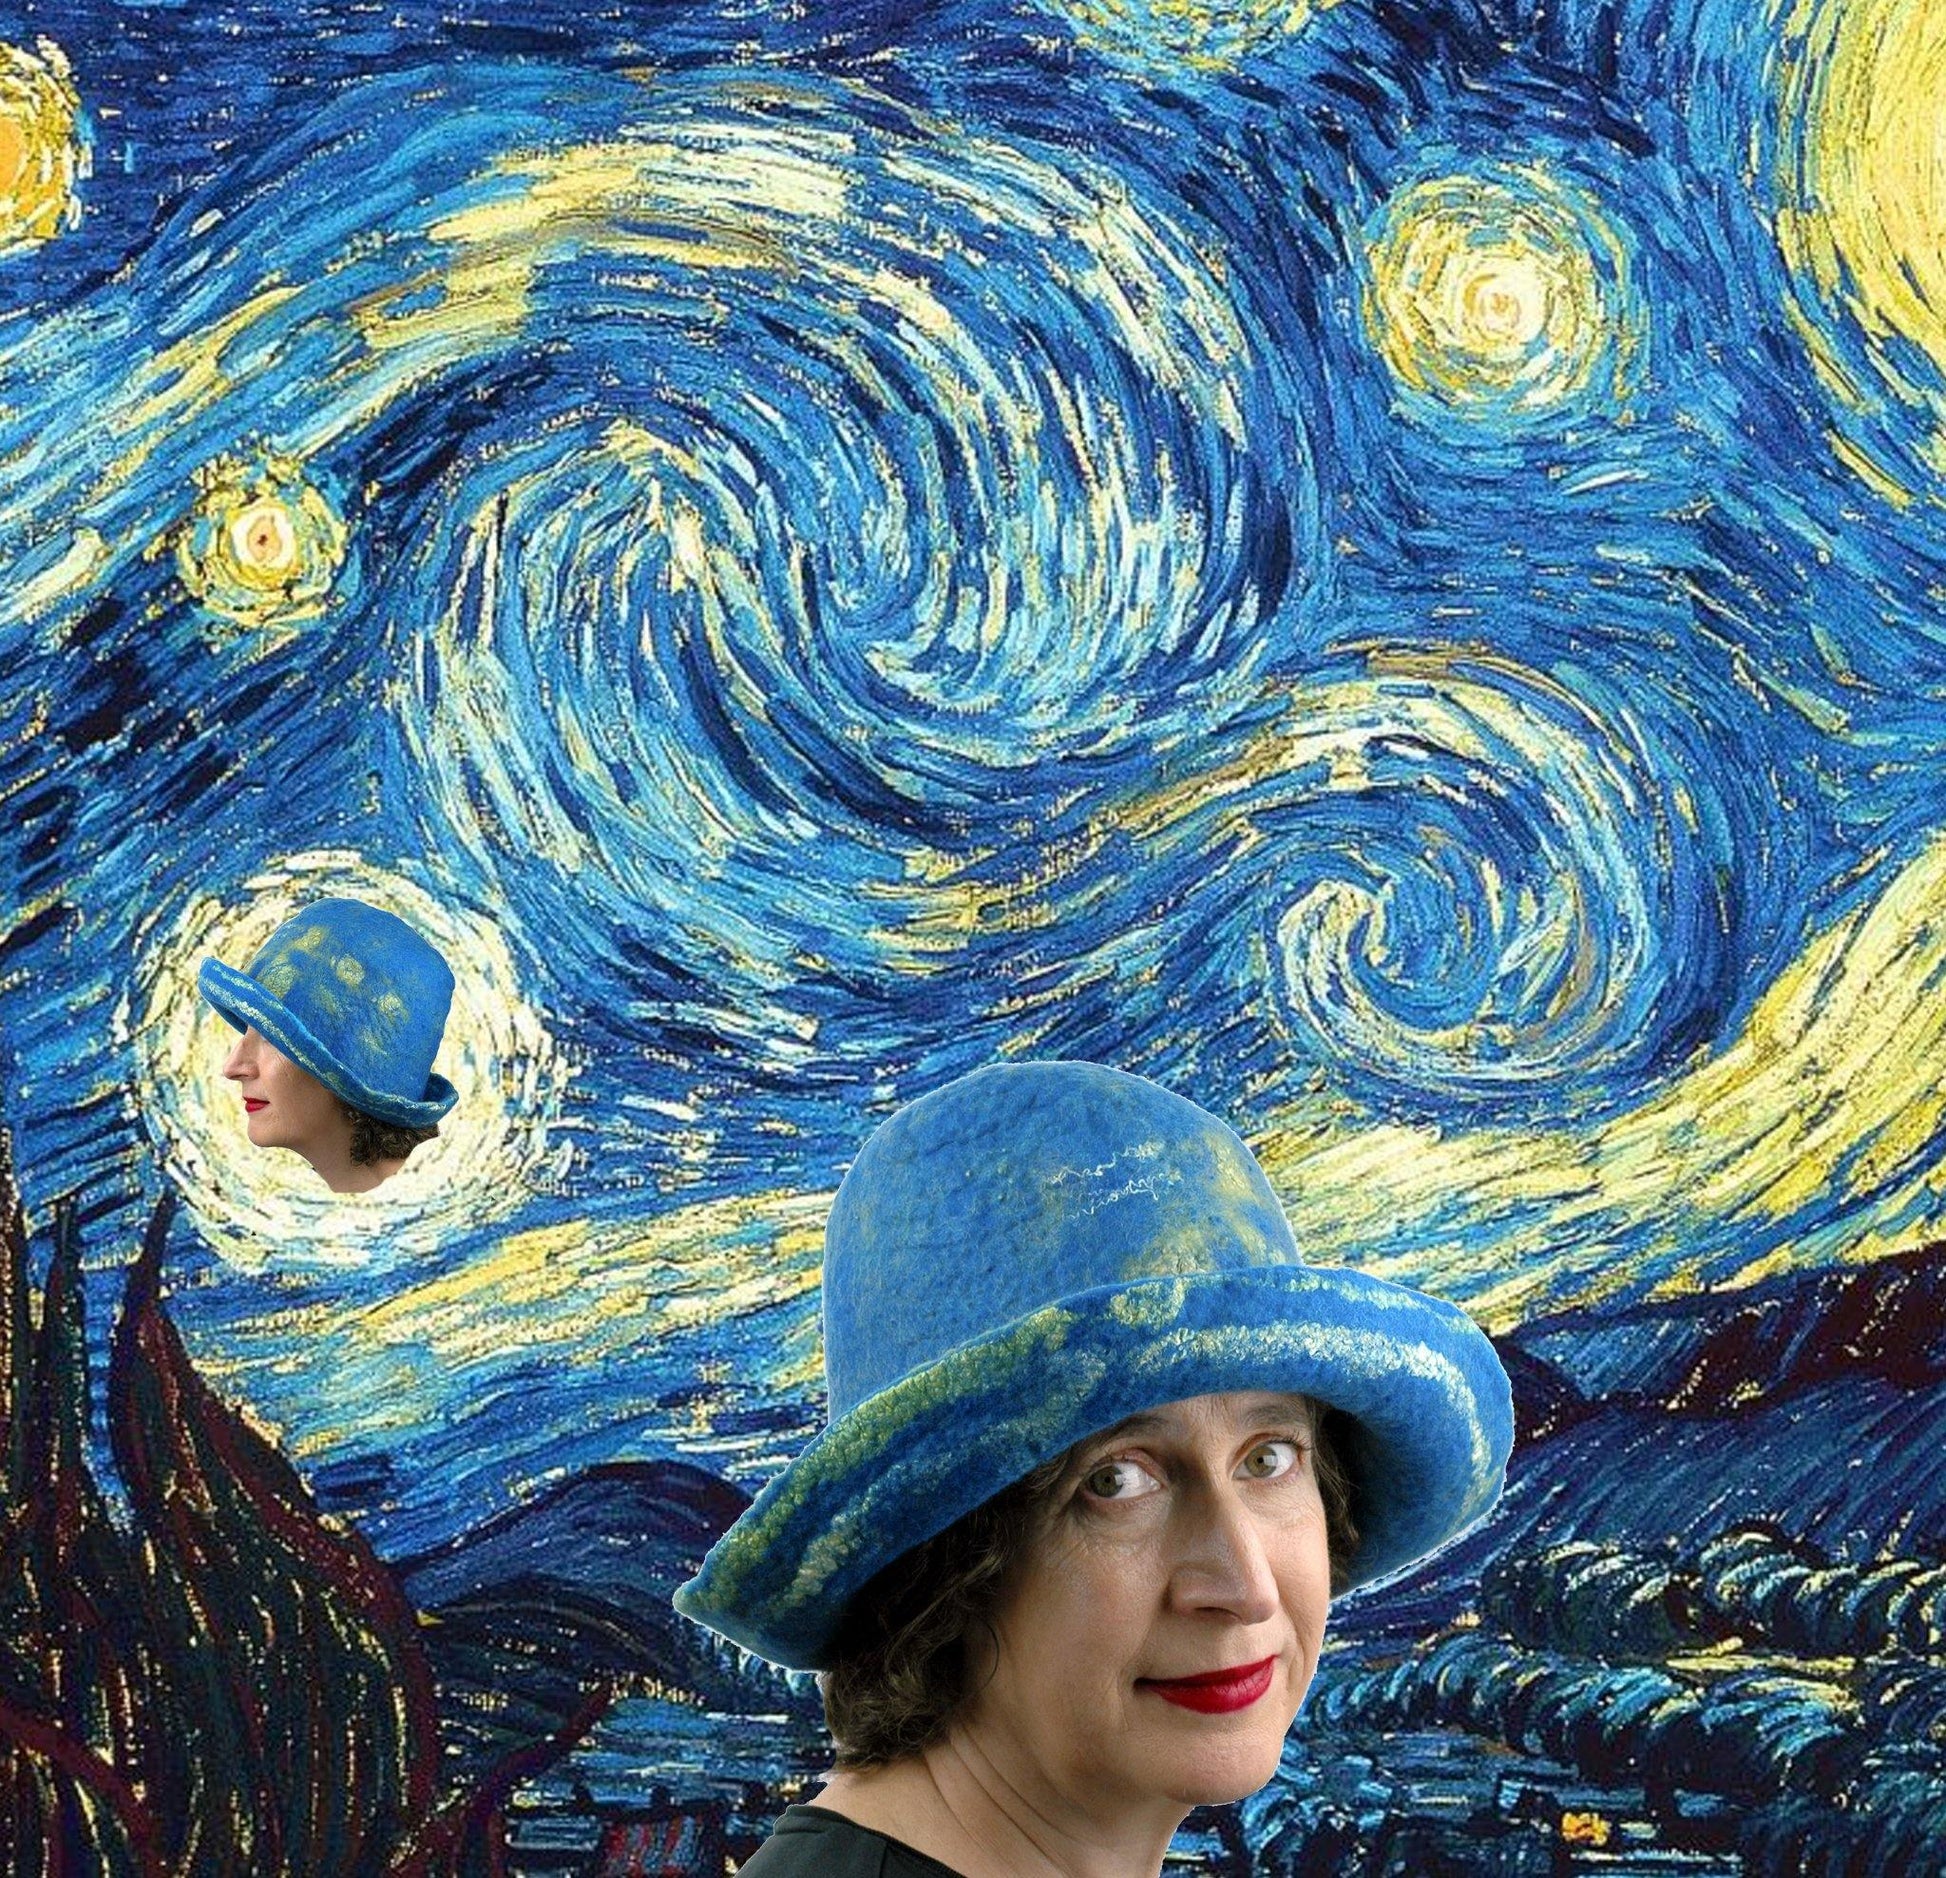 Starry Night by Vincent van Gogh and the  Blue Felted Brimmed Hat in a digital collage.